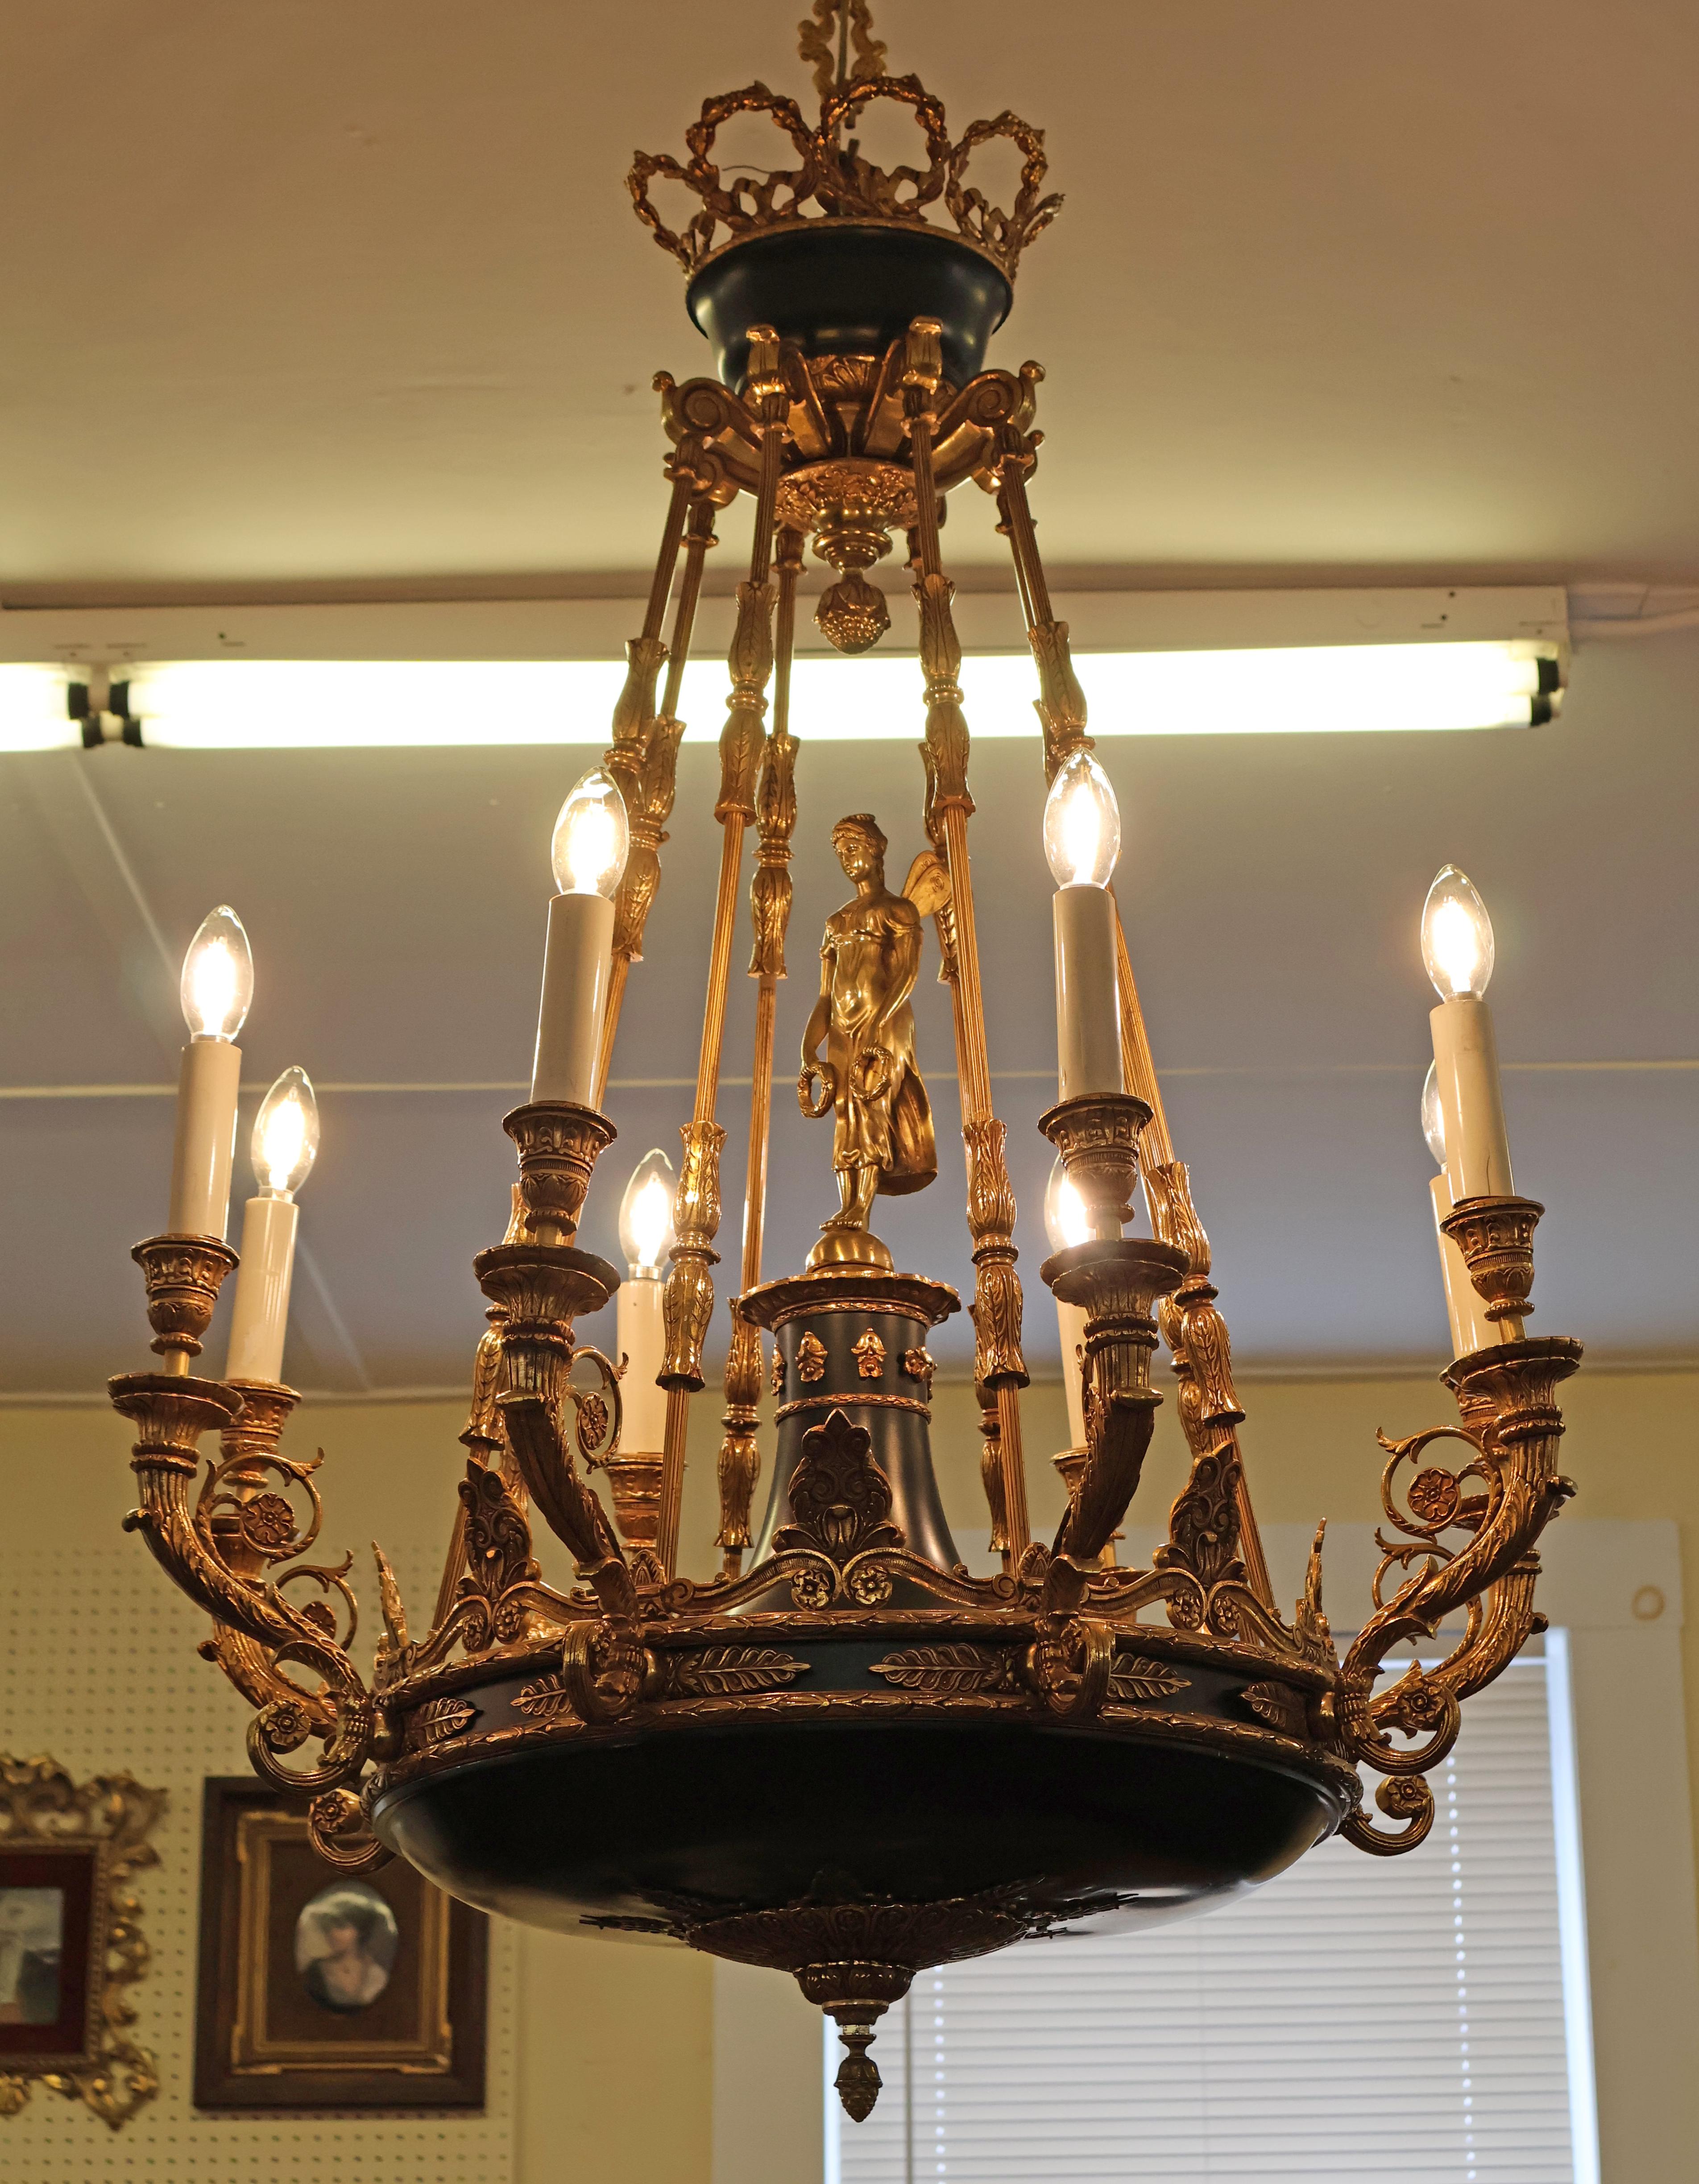 Excellent Italian Made French Empire Style 8 Light Bronze Chandelier 42 X 30 In Good Condition For Sale In Long Branch, NJ